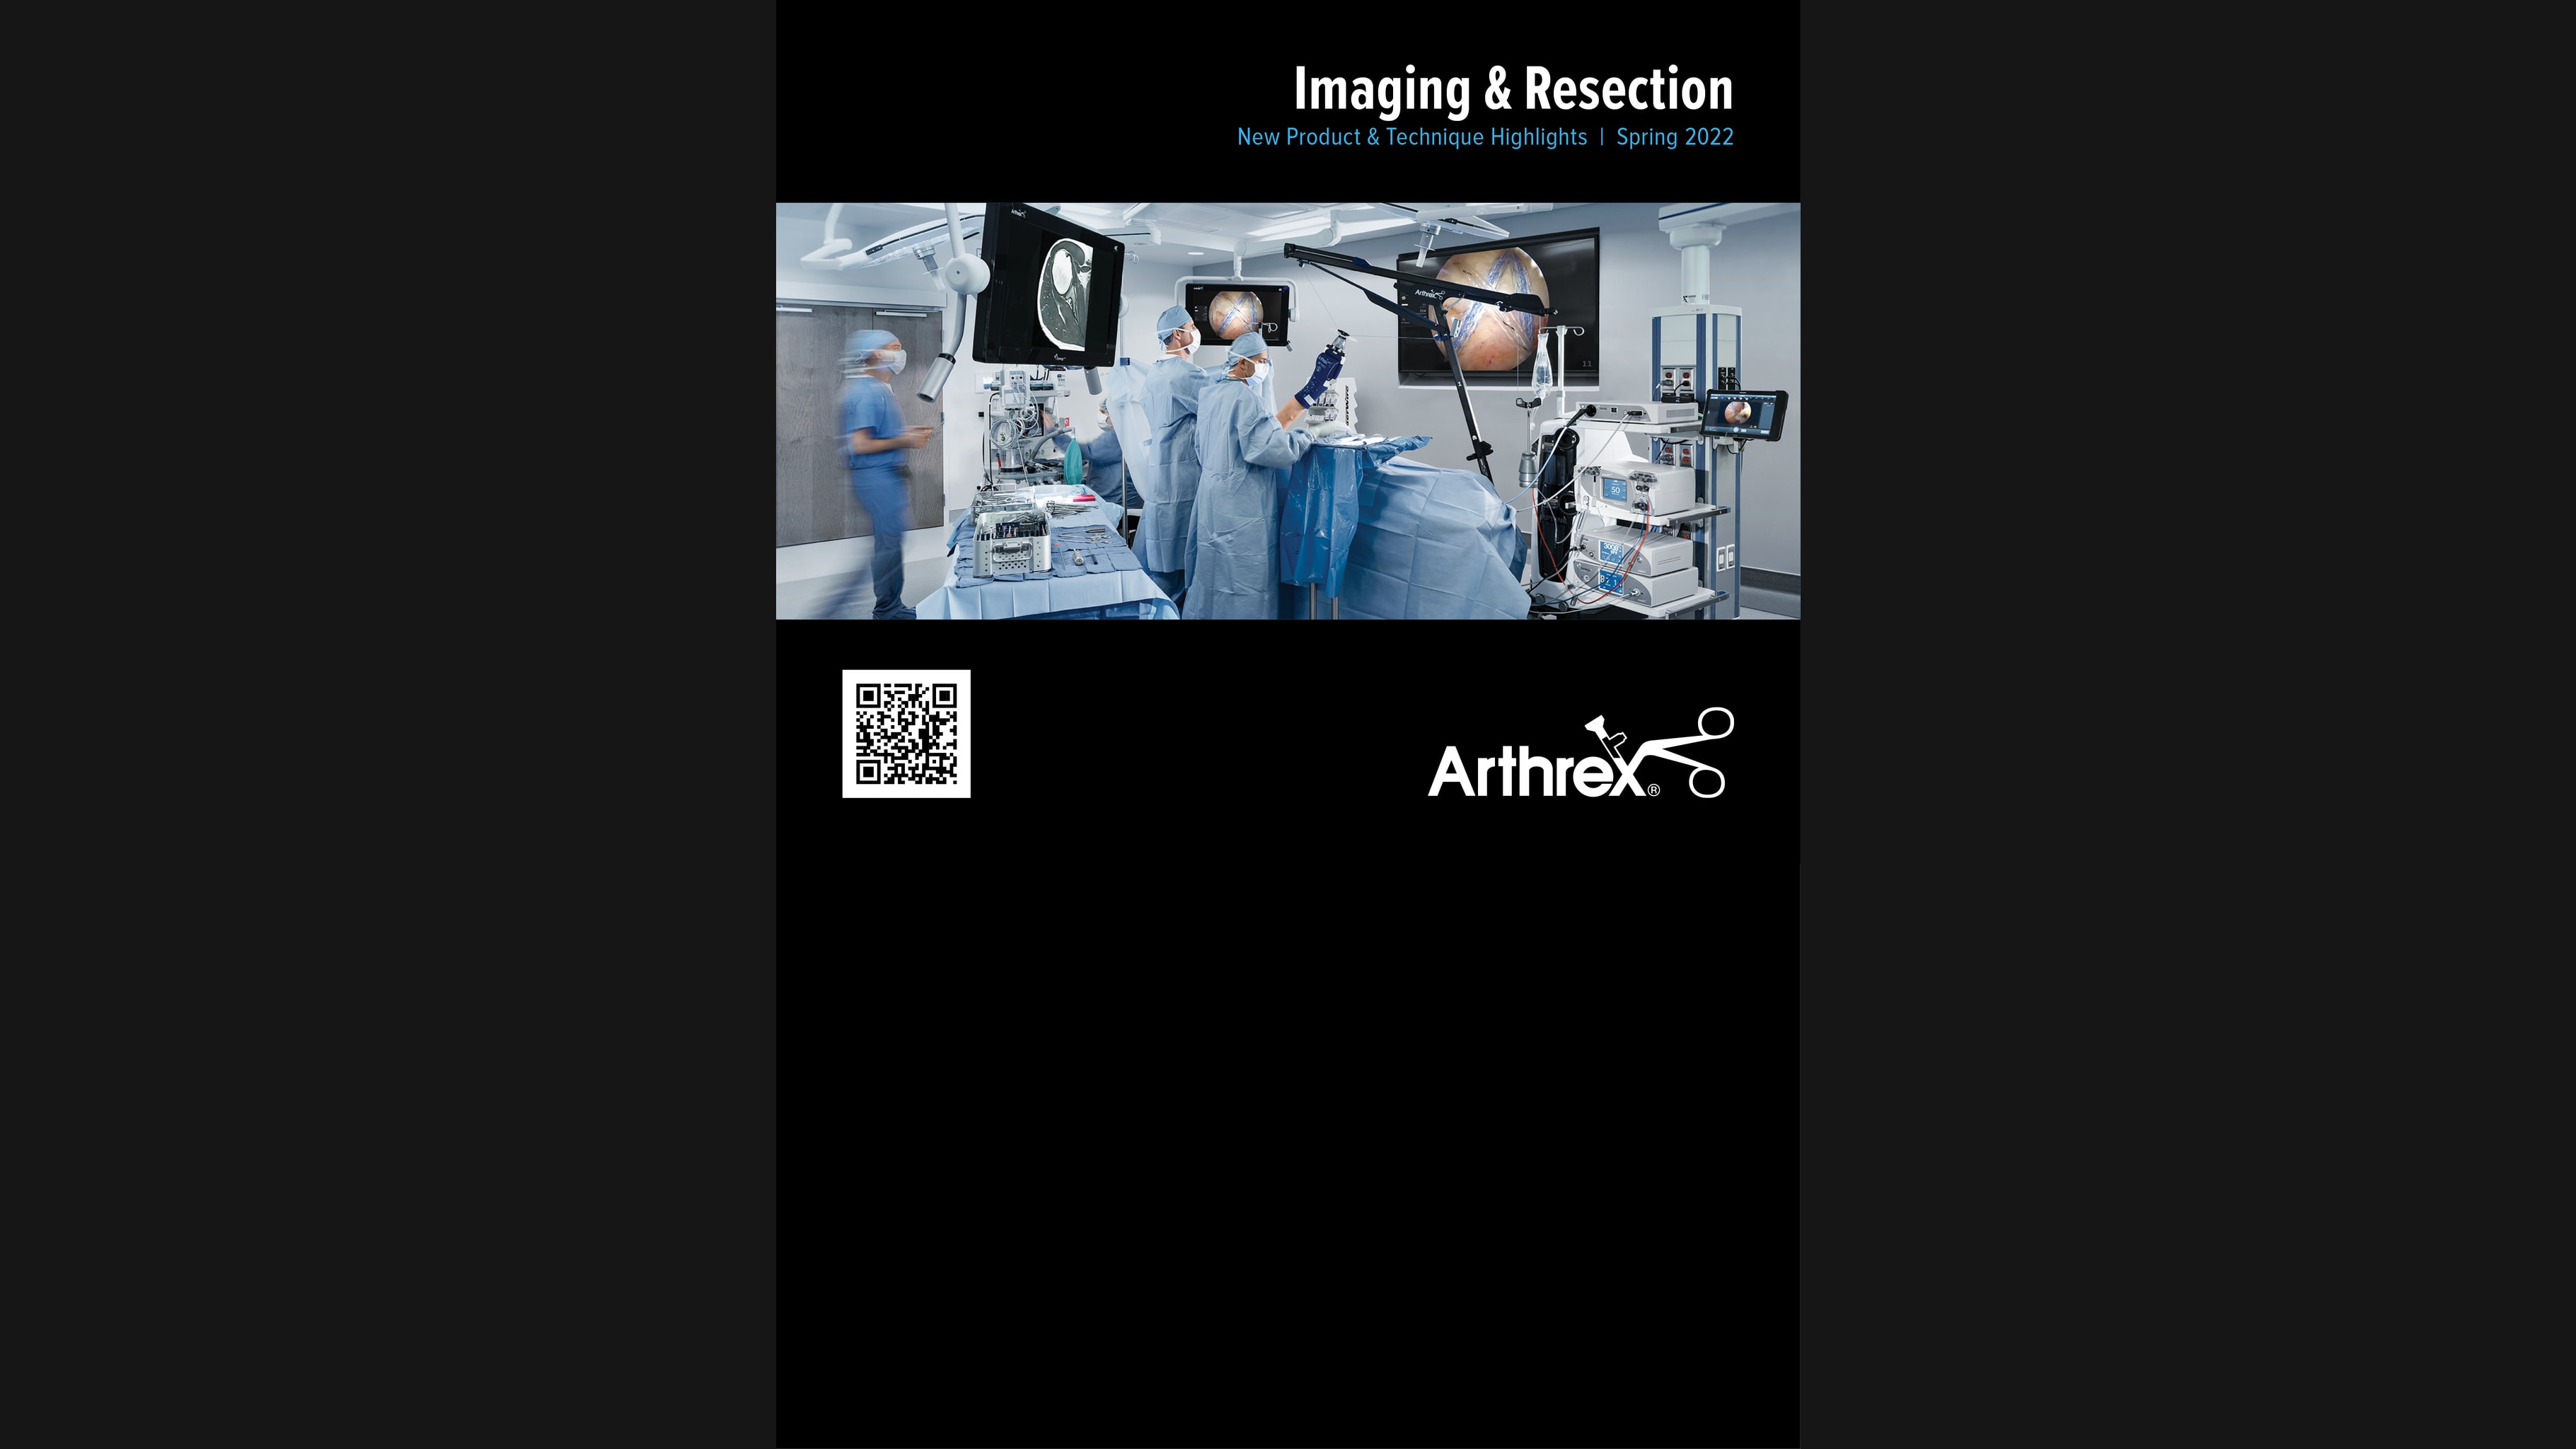 Imaging & Resection New Product & Technique Highlights